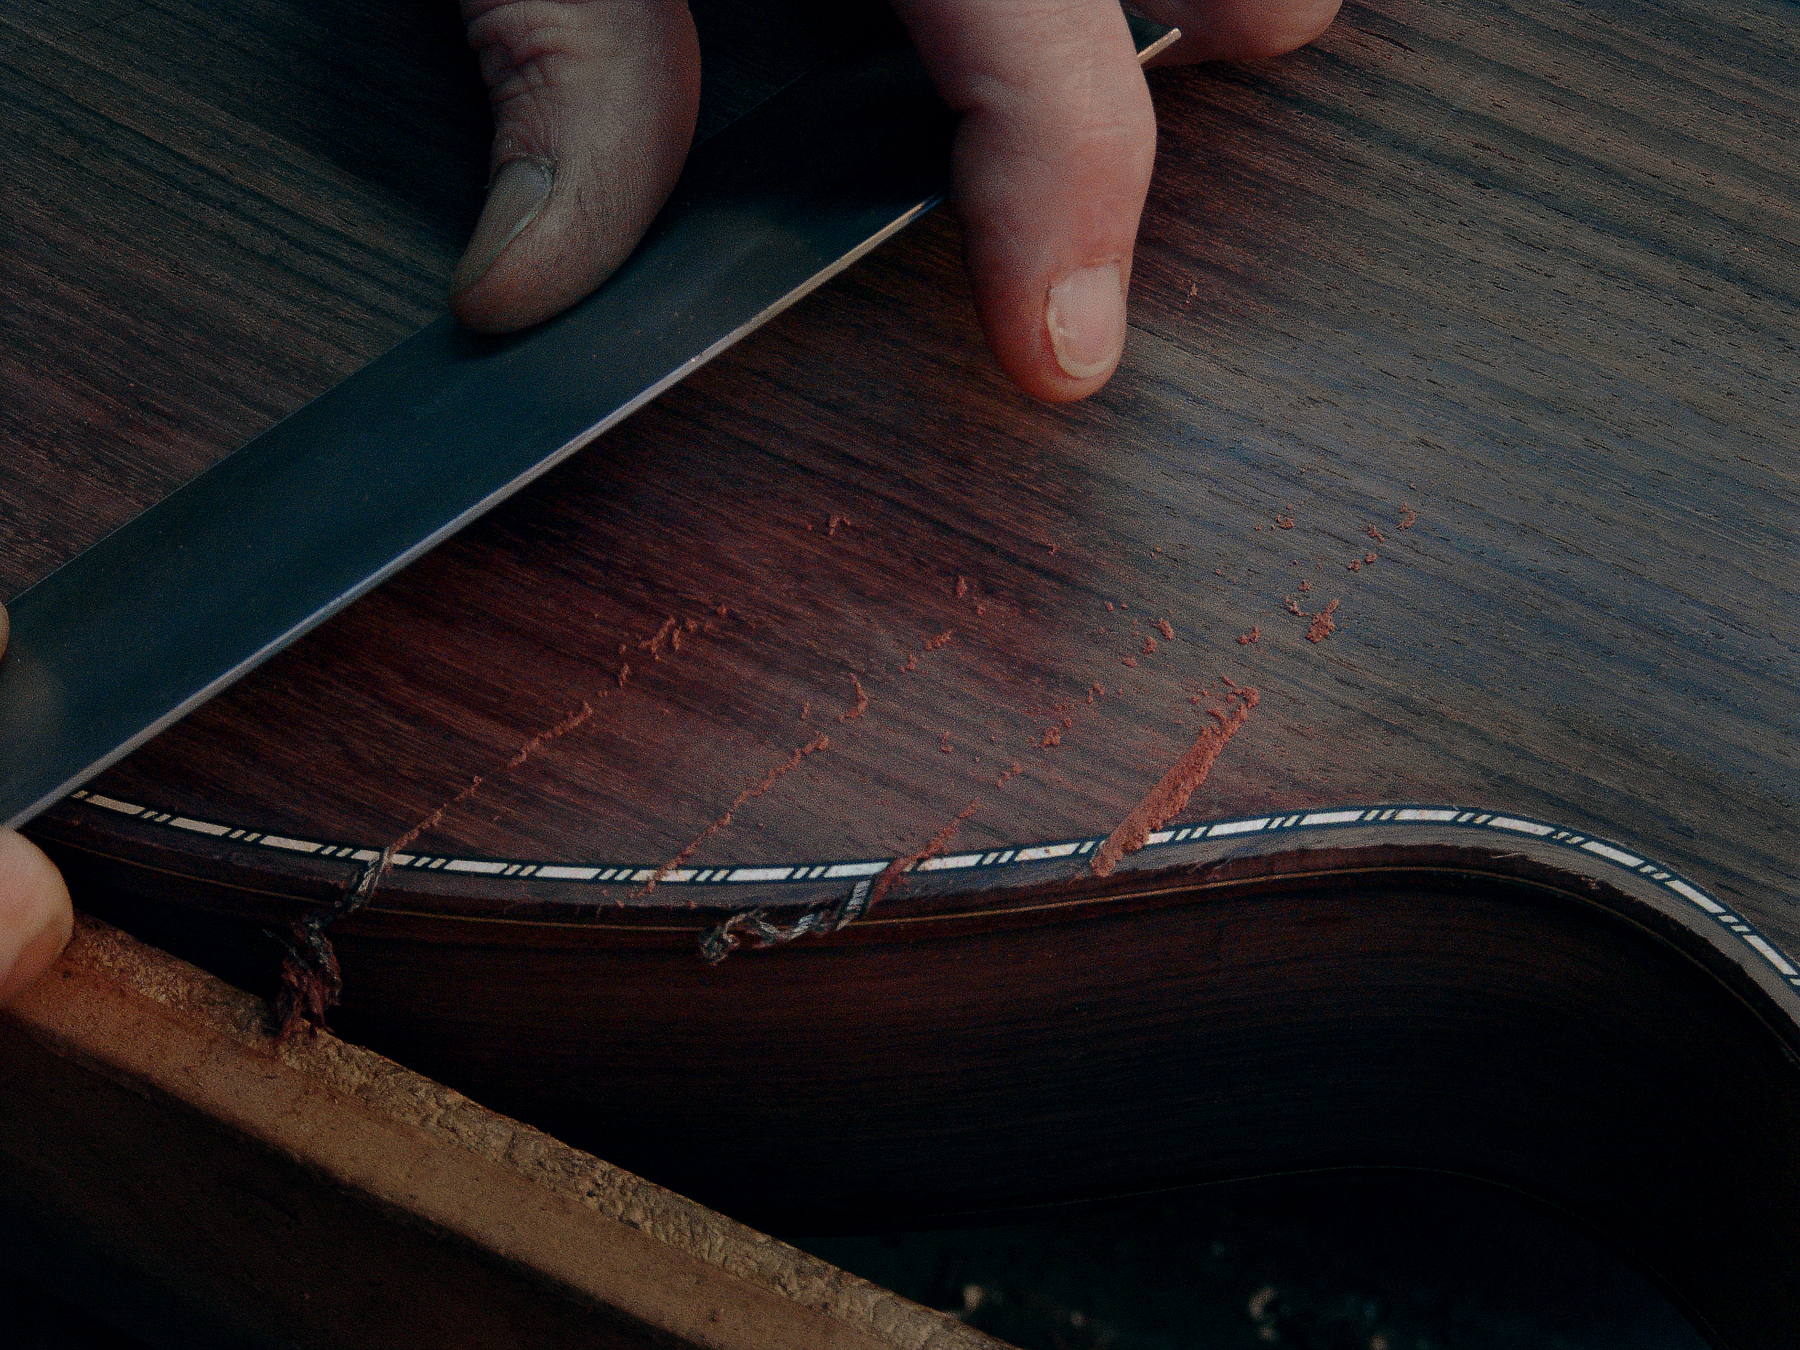 Guitar Maker Peter Stephen shaves the back and purflings of an acoustic cutaway guitar